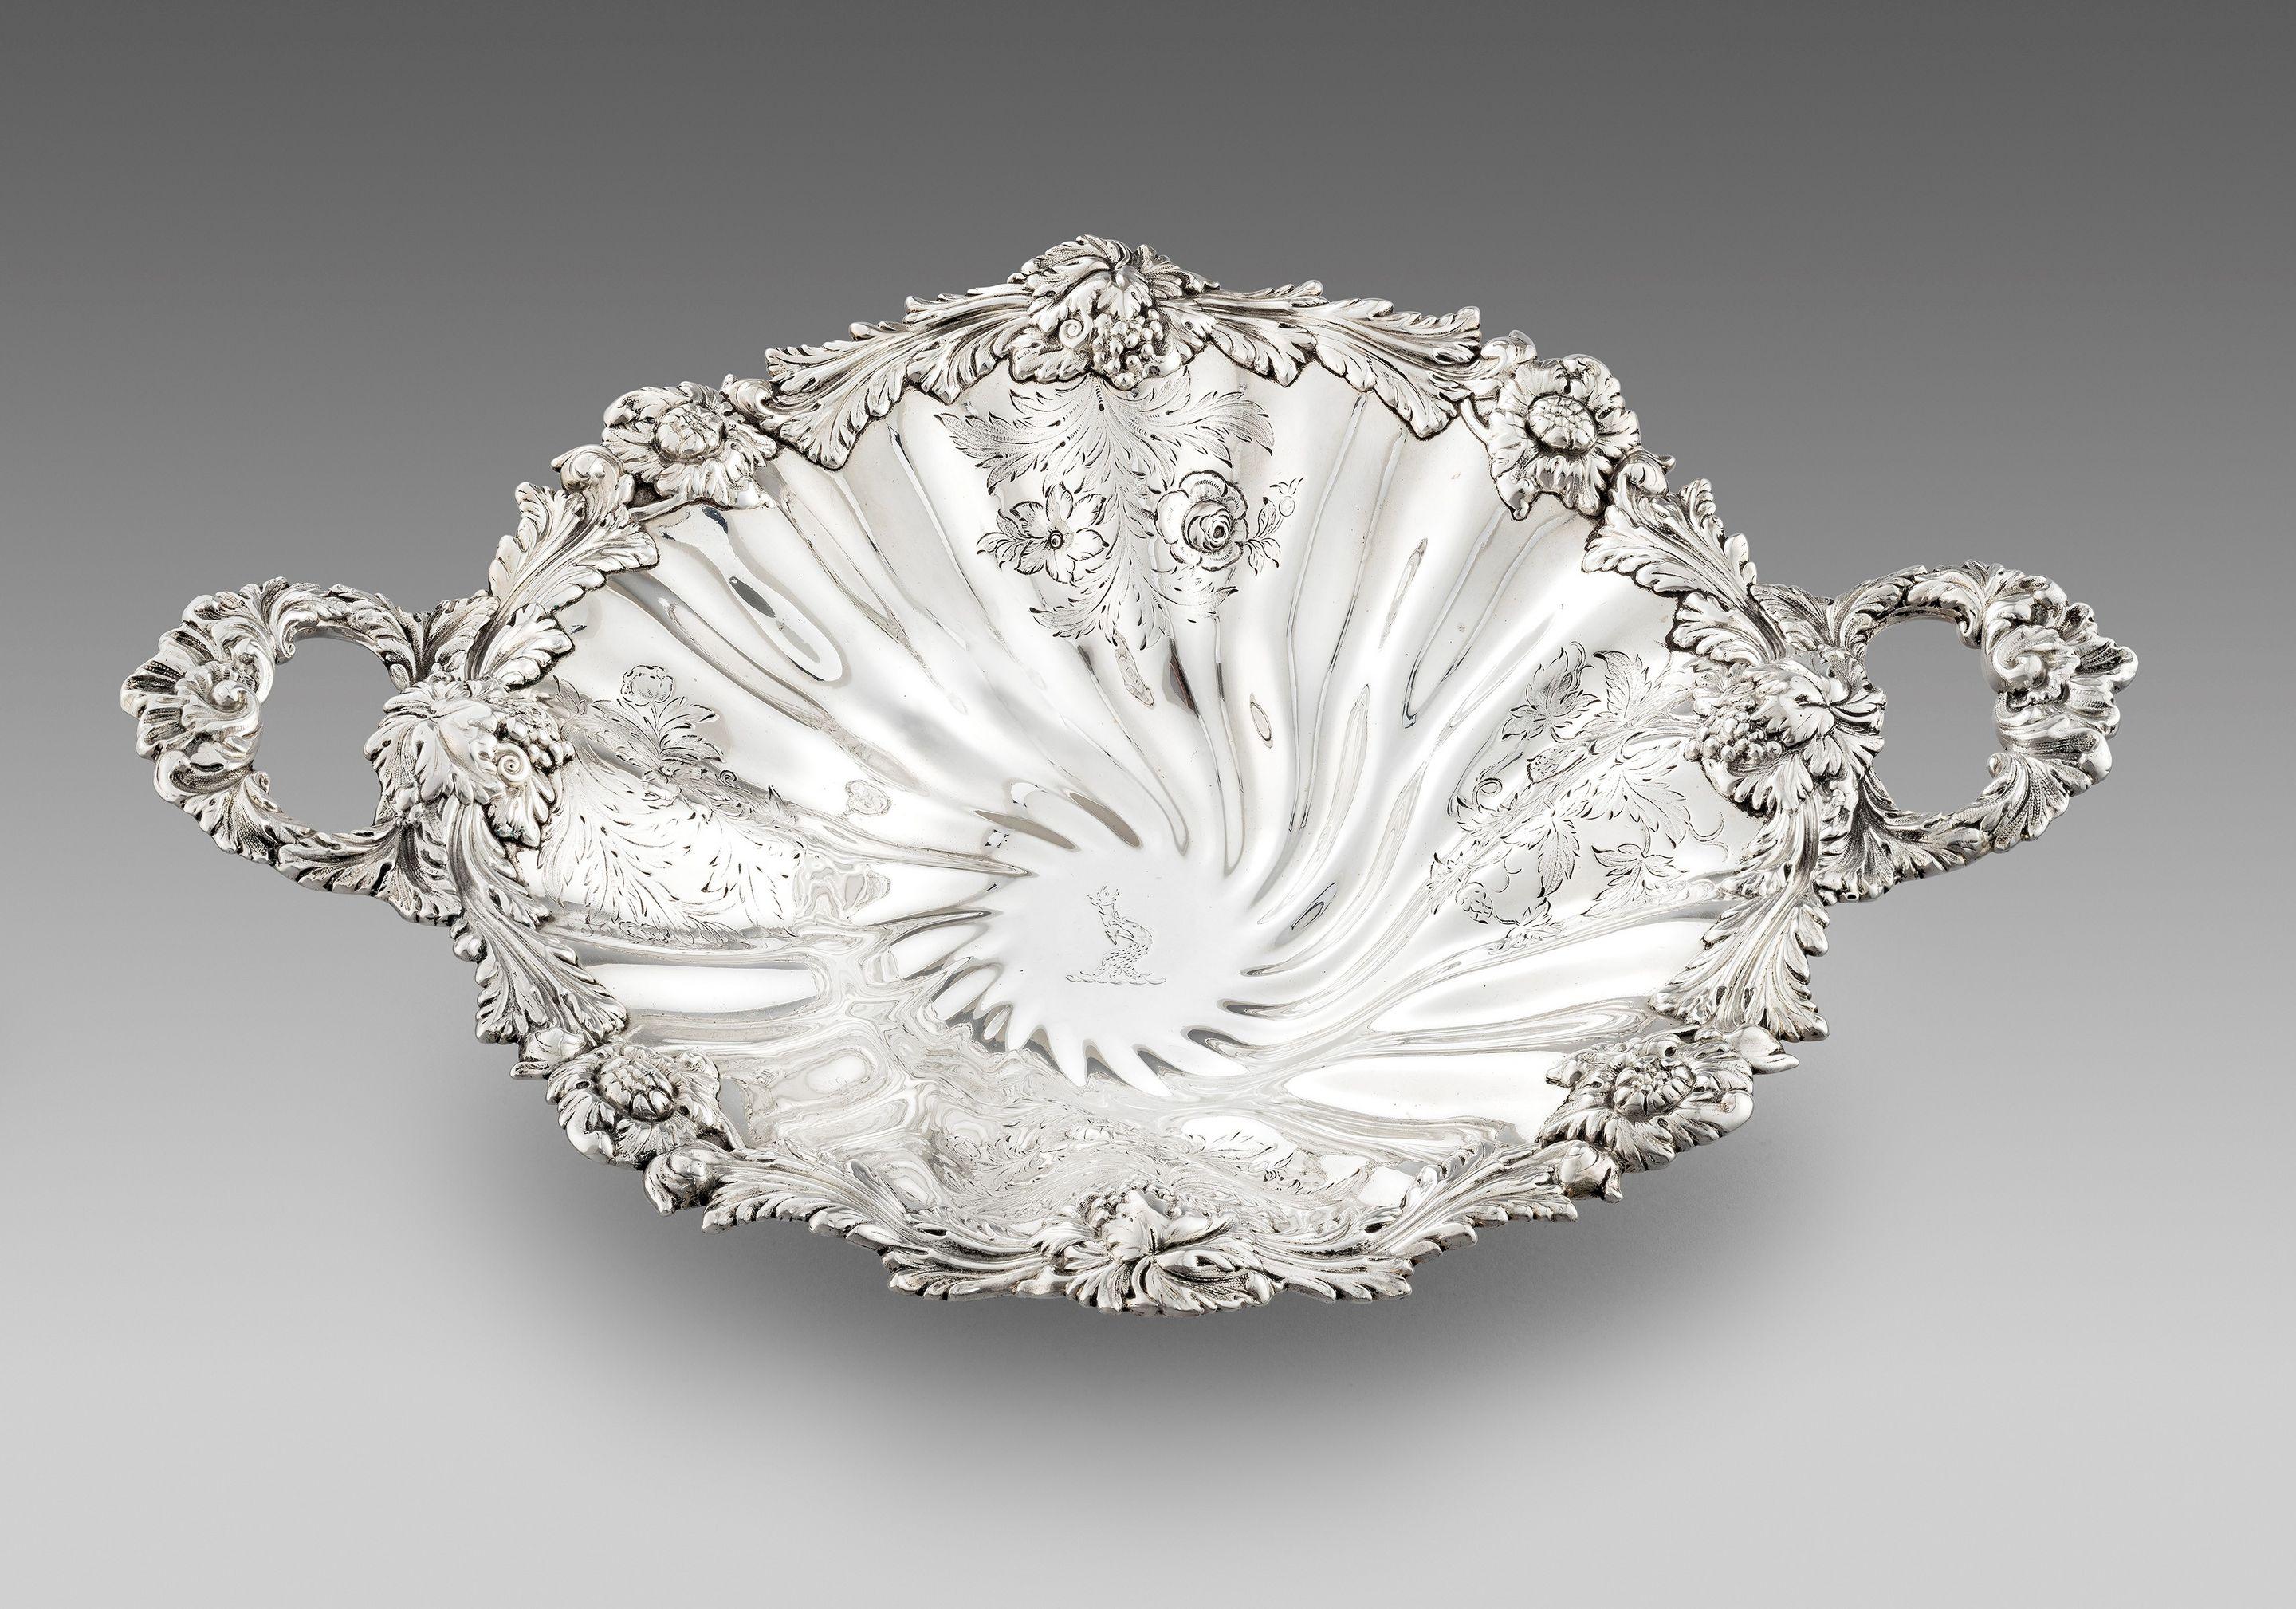 A beautiful Antique dish made in the reign of William IV , in 1833 . The two handled dish is of round shaped form with an impressive border depicting grapes, flowers and foliage. The decoration is repeated on the fluted body and the centre is